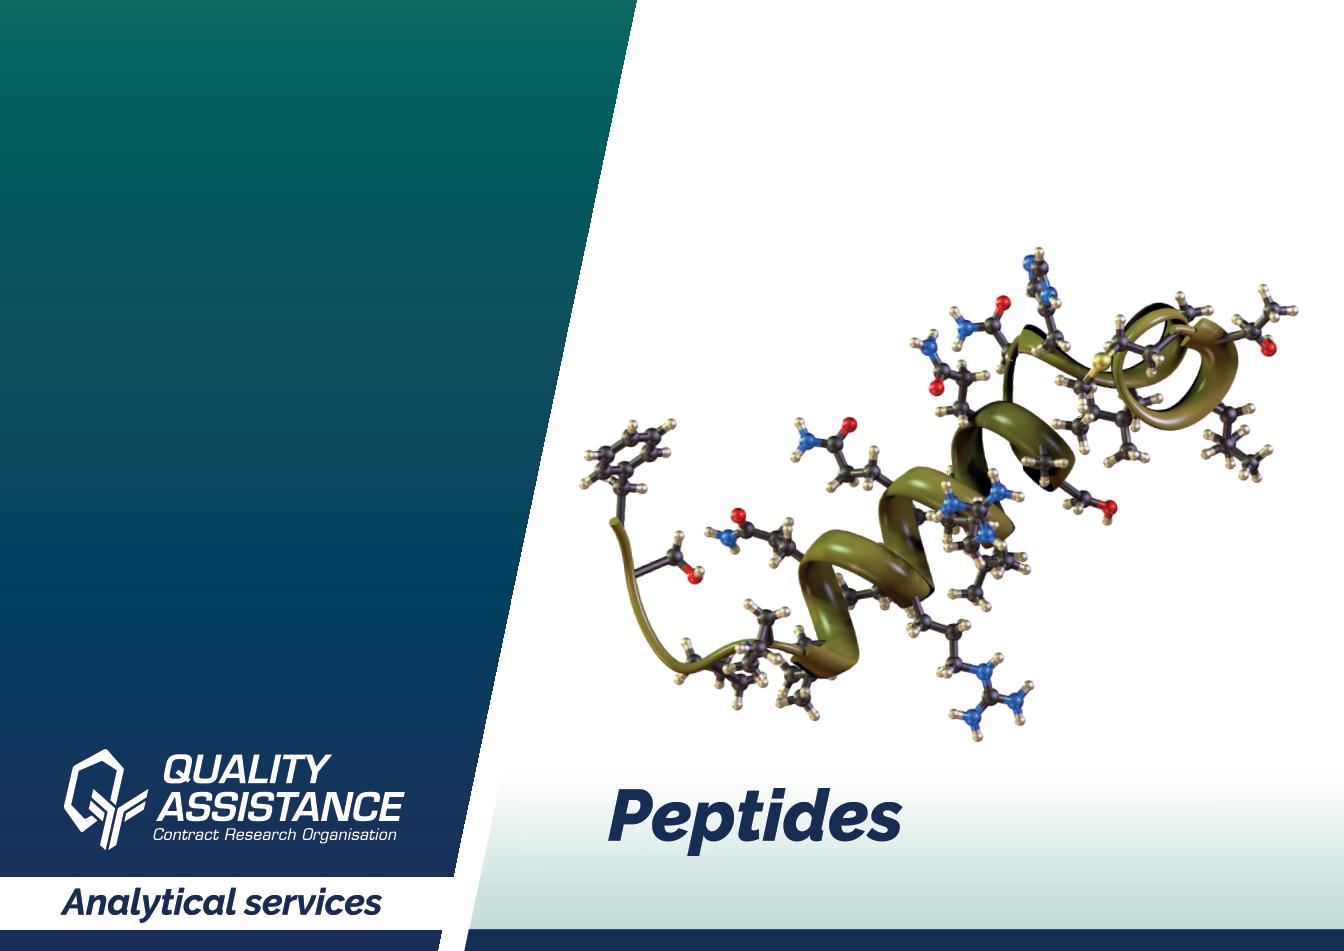 Learn more on our Peptides expertise